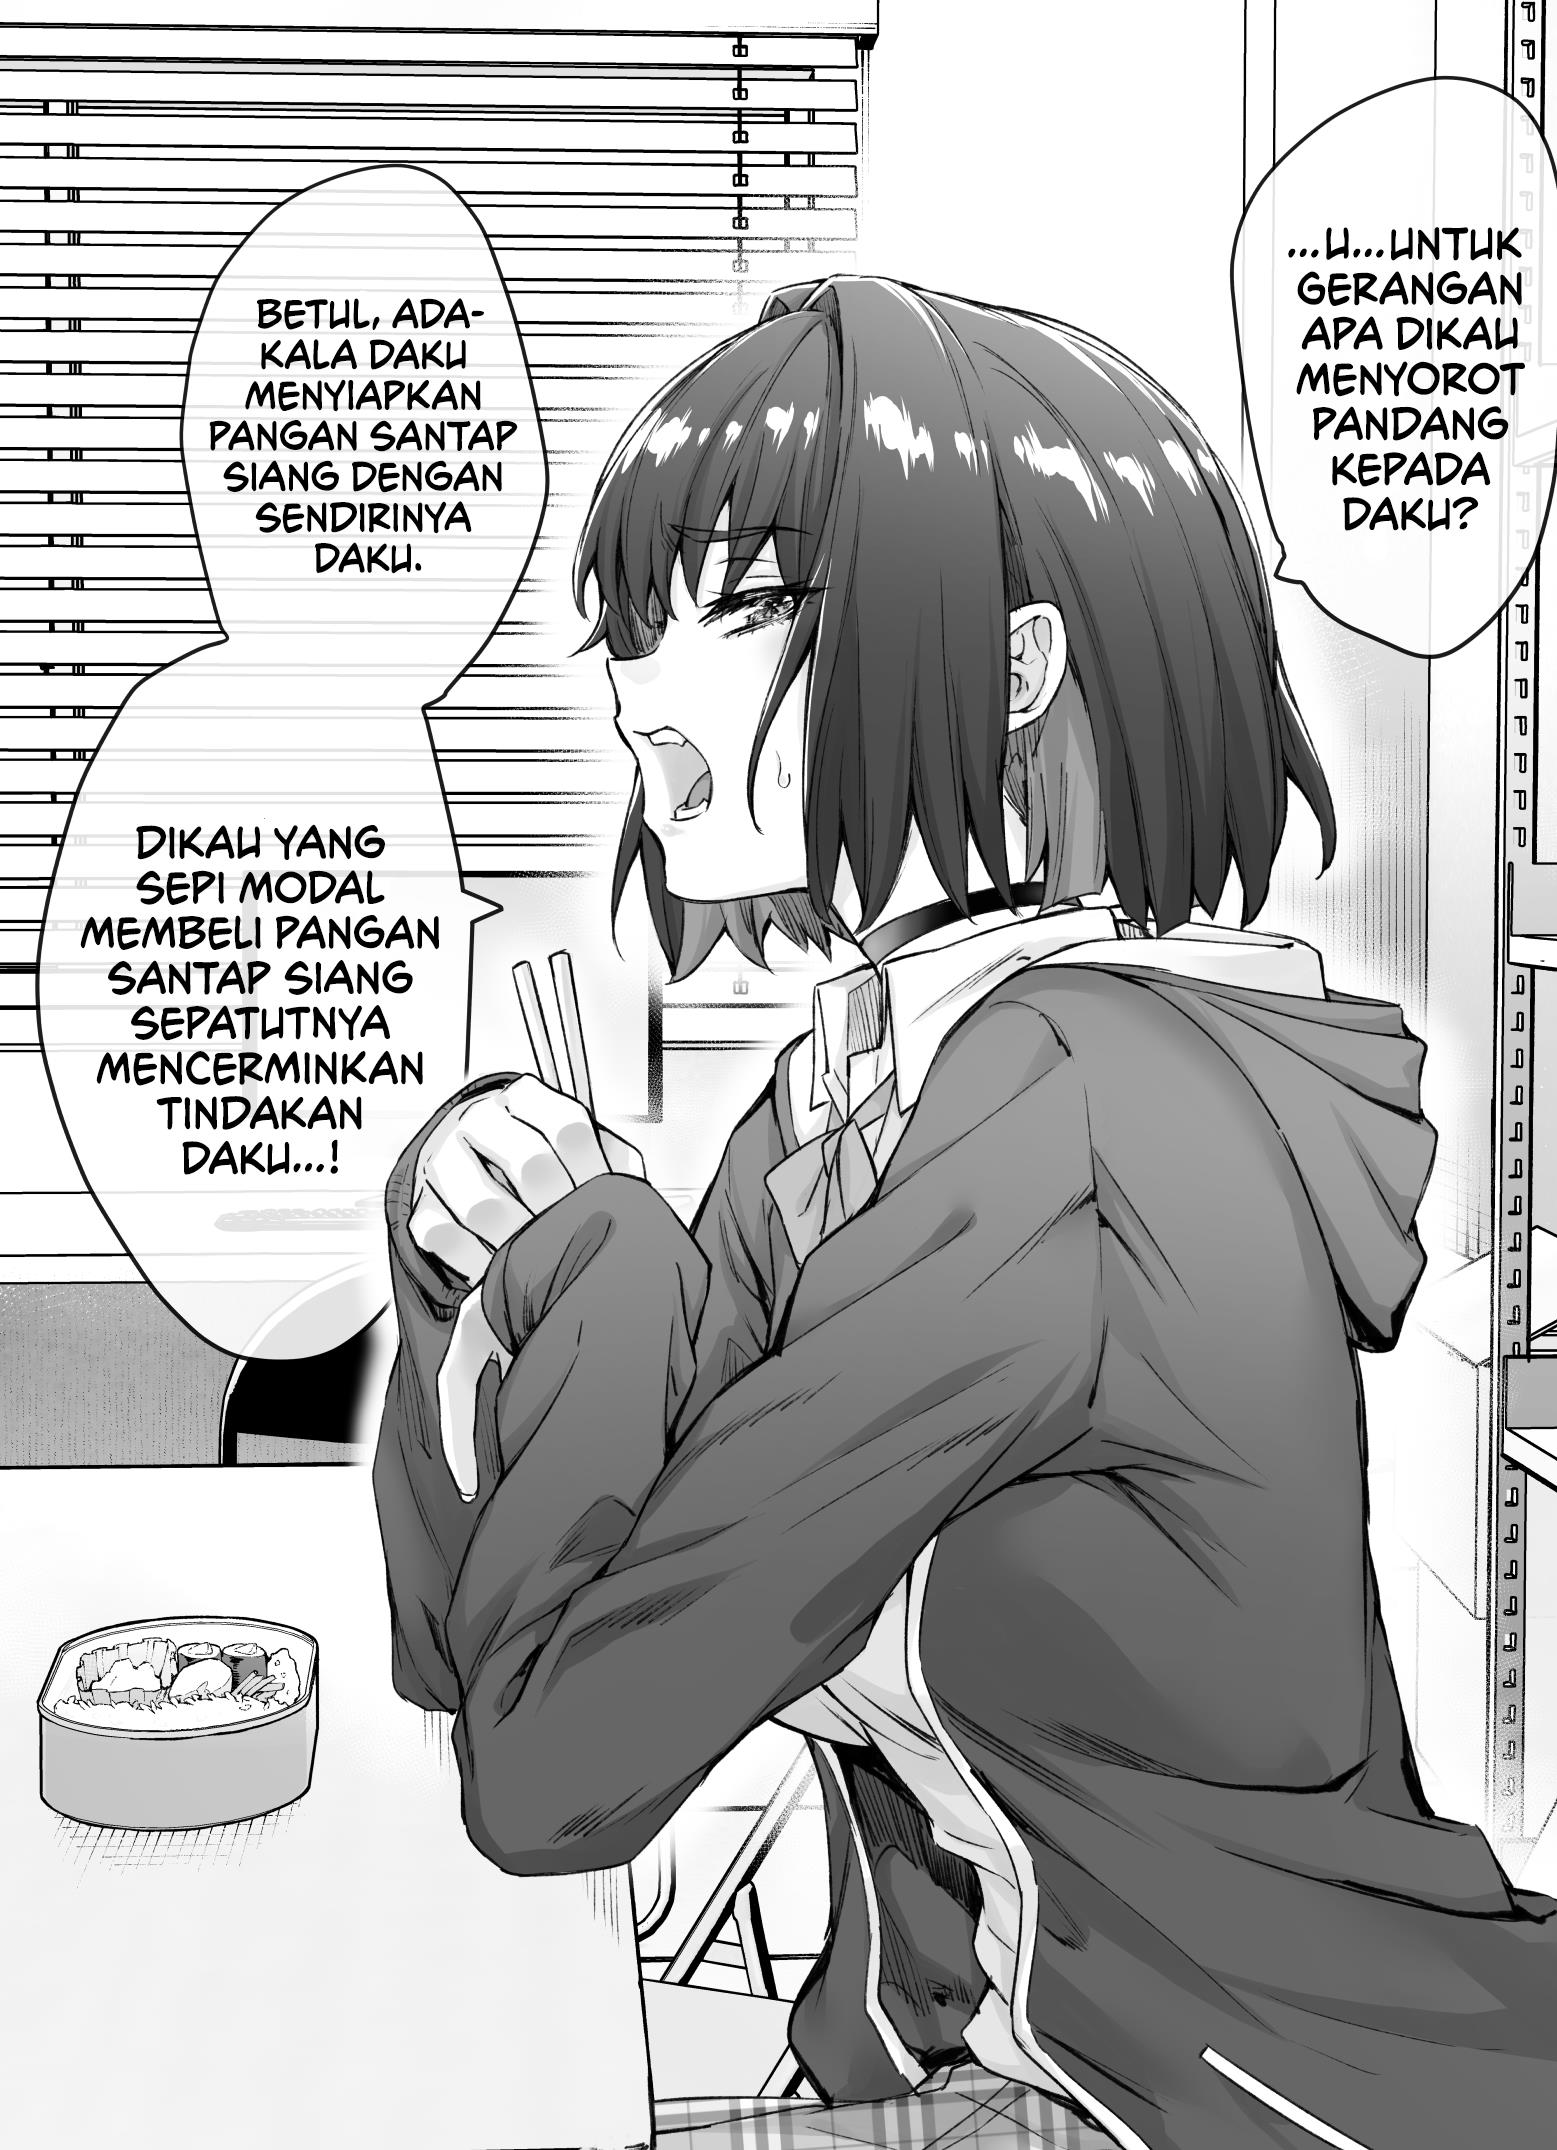 The Tsuntsuntsuntsuntsuntsun tsuntsuntsuntsuntsundere Girl Getting Less and Less Tsun Day by Day Chapter 17.1